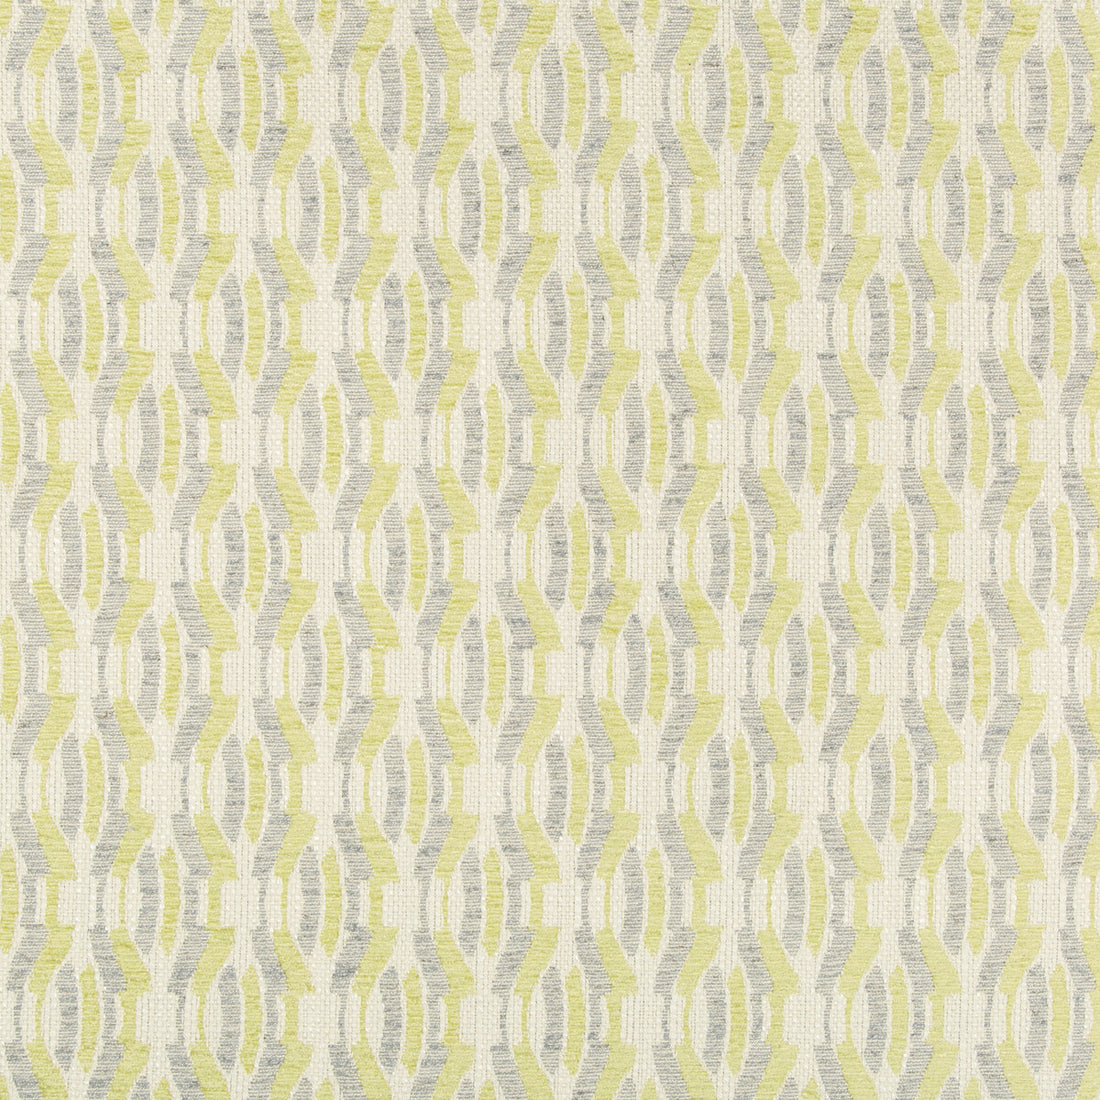 Agate Weave fabric in lime color - pattern GWF-3748.143.0 - by Lee Jofa Modern in the Gems collection